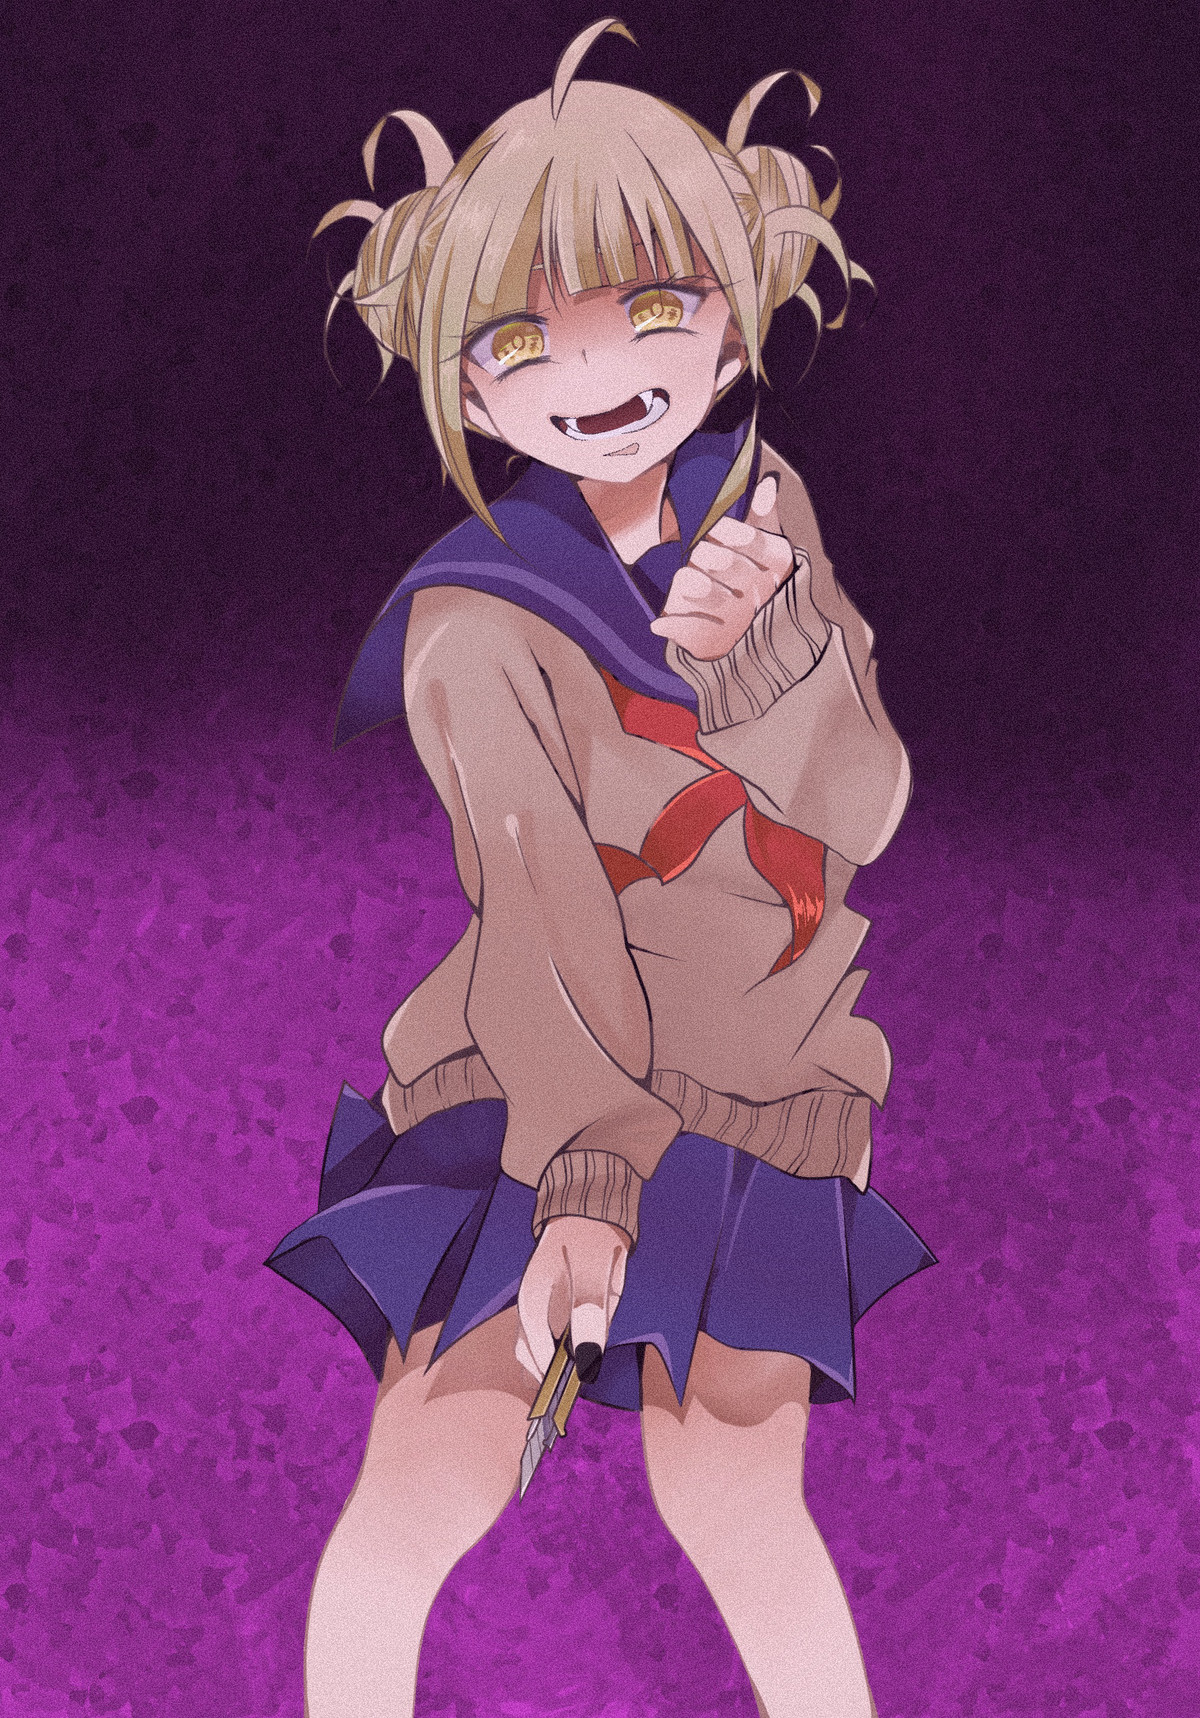 Daily Toga - 987: She wants it. join list: DailyToga (477 subs)Mention History Source: Your blood, she wants your blood - Source: .. Toga, why are looking at that airplane???